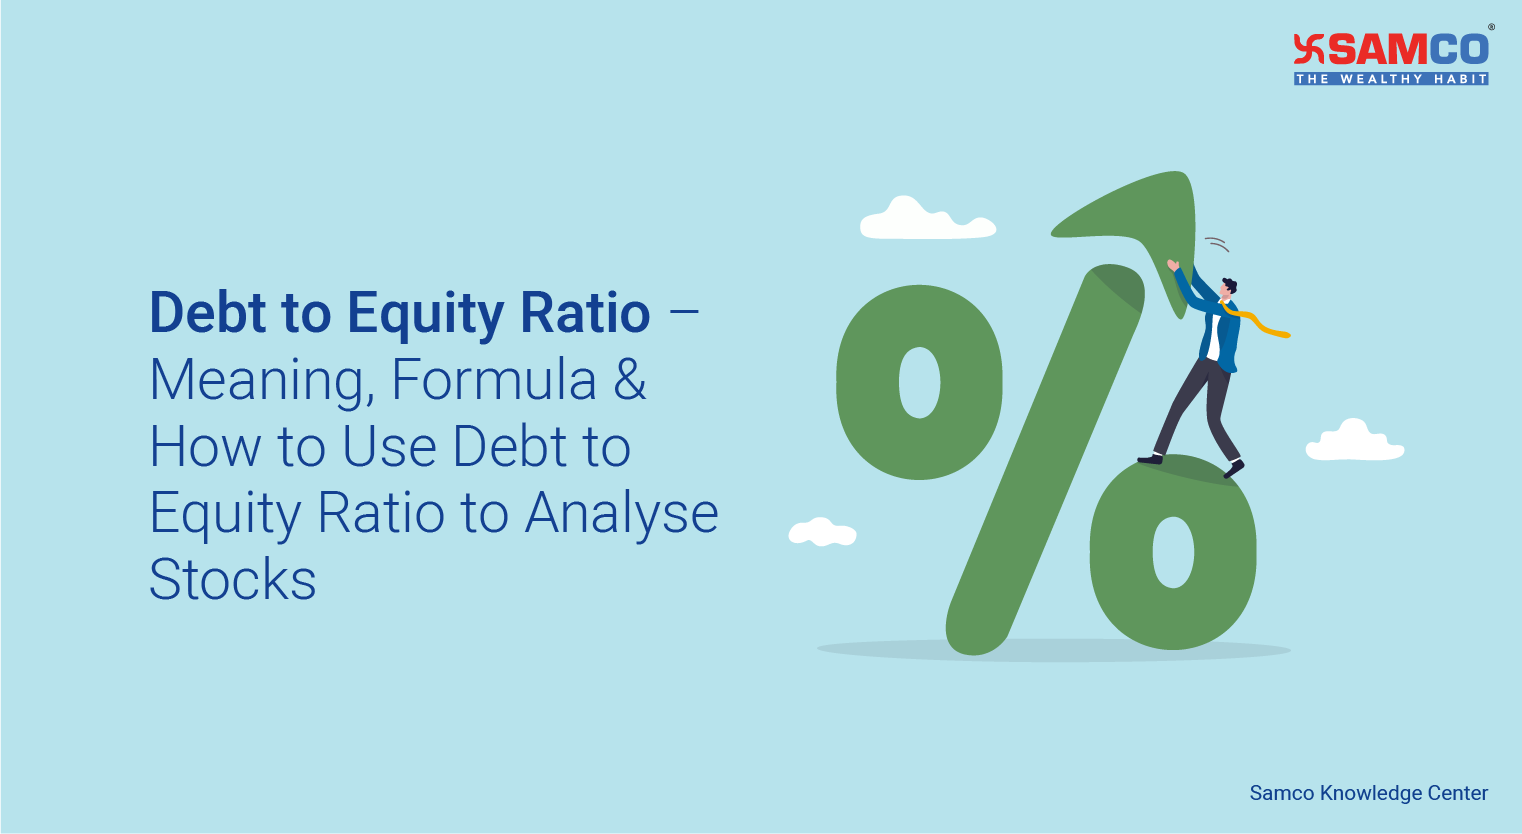 Debt to Equity Ratio Meaning, Formula & How to Use Debt to Equity Ratio to Analyse Stocks